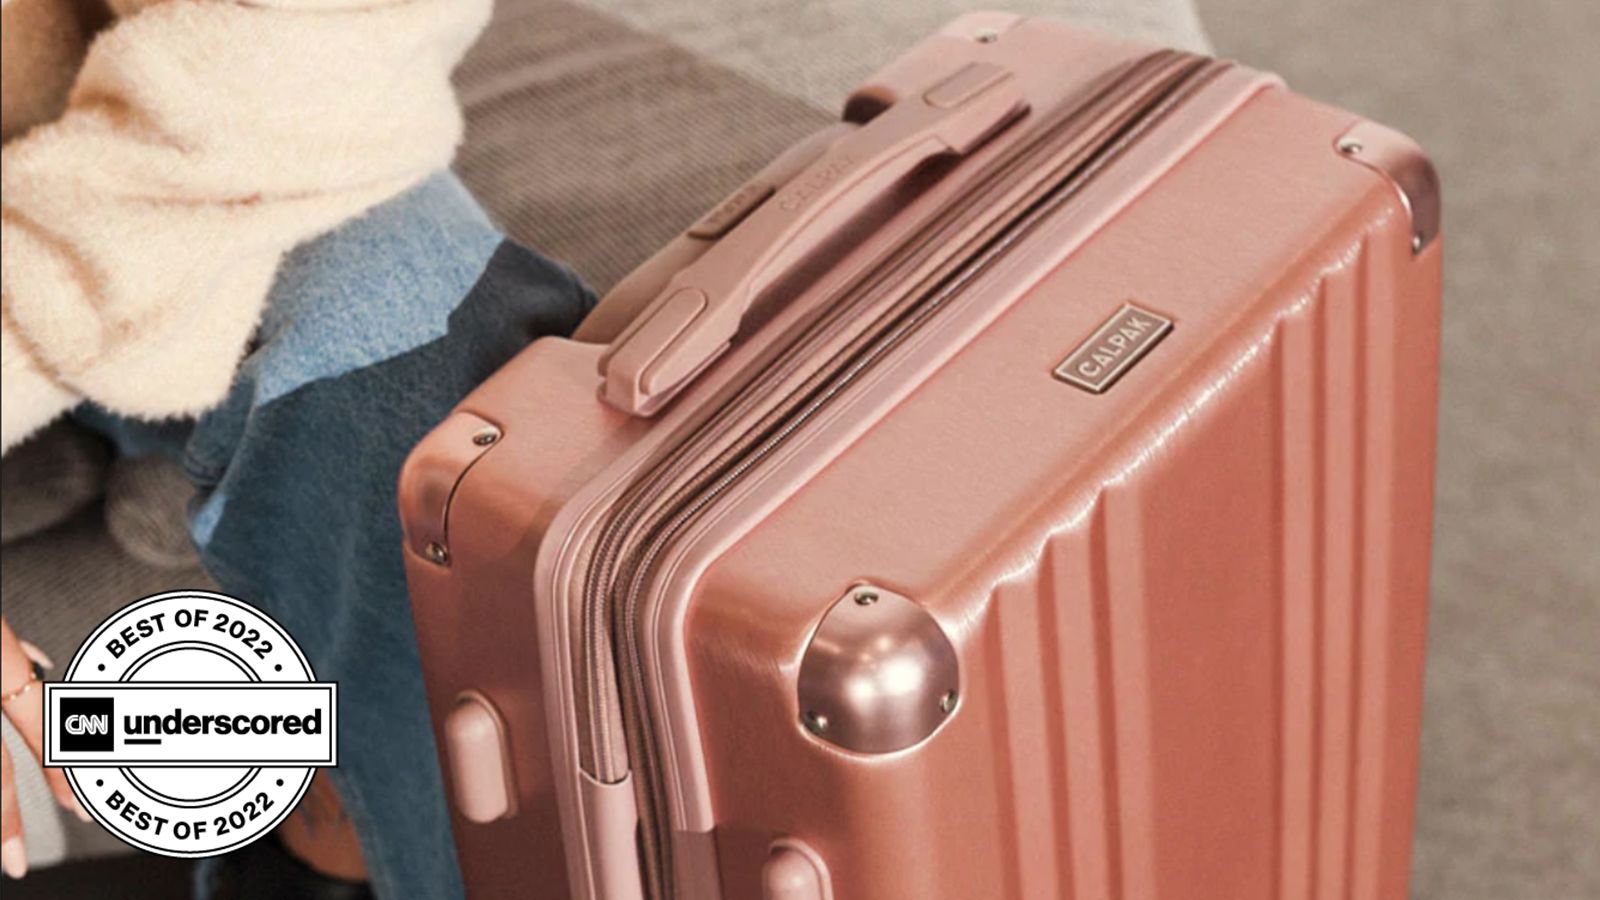 Calpak Luggage Review: Is It Worth the Hype?